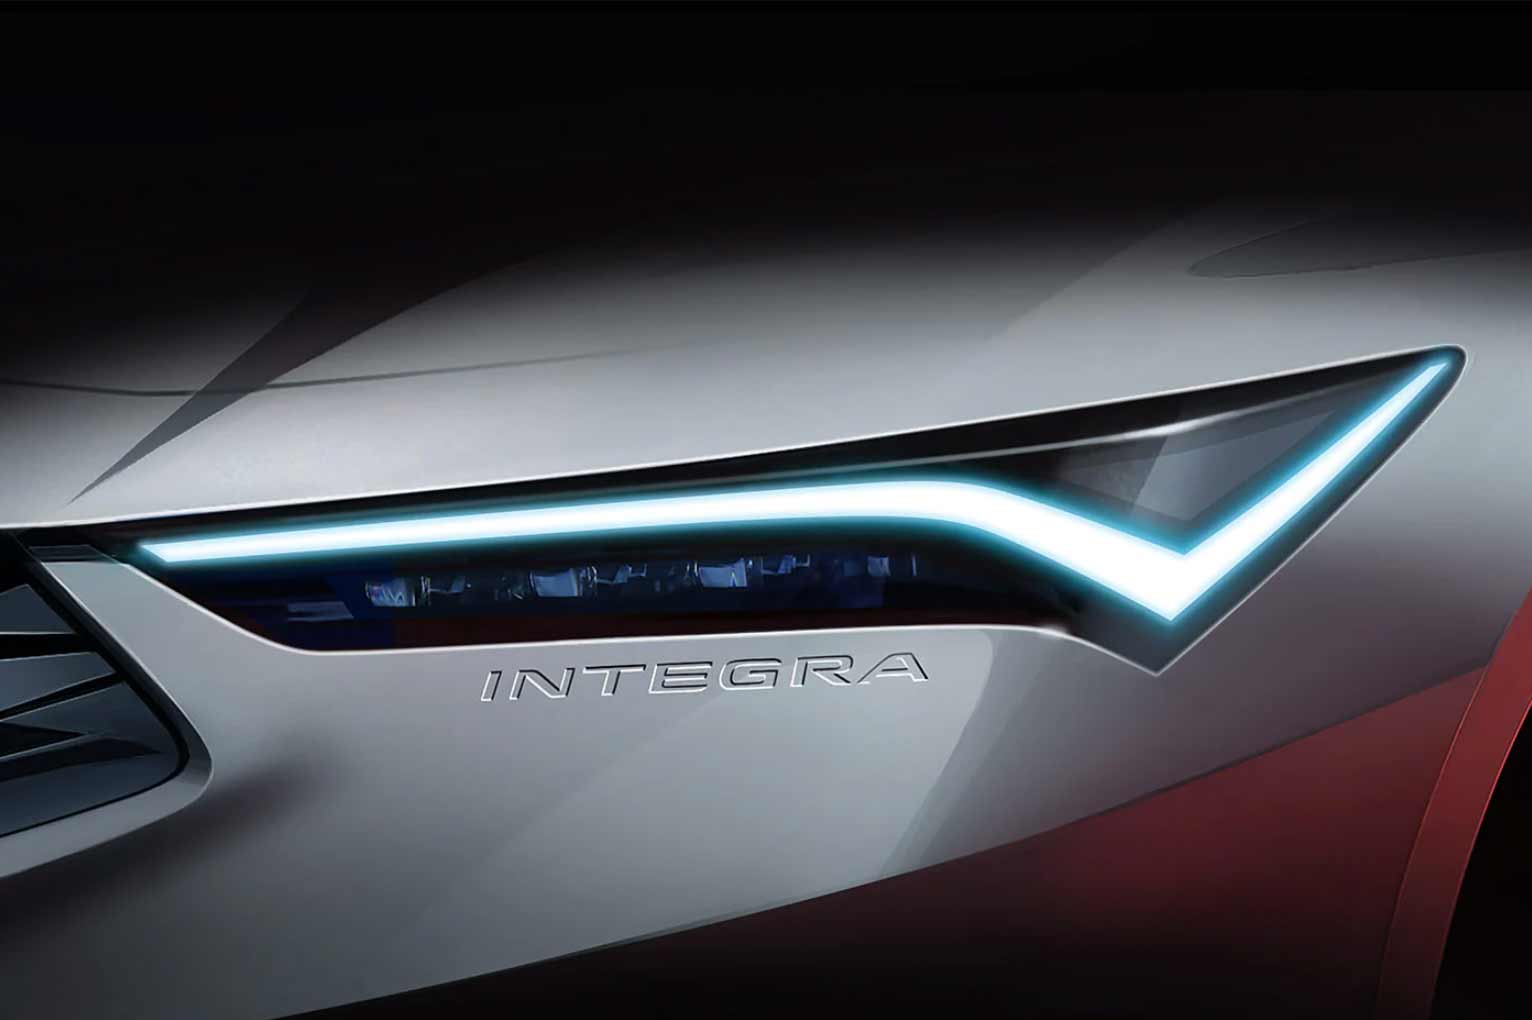 The Return of a Legend: Acura Teases the 2023 Integra